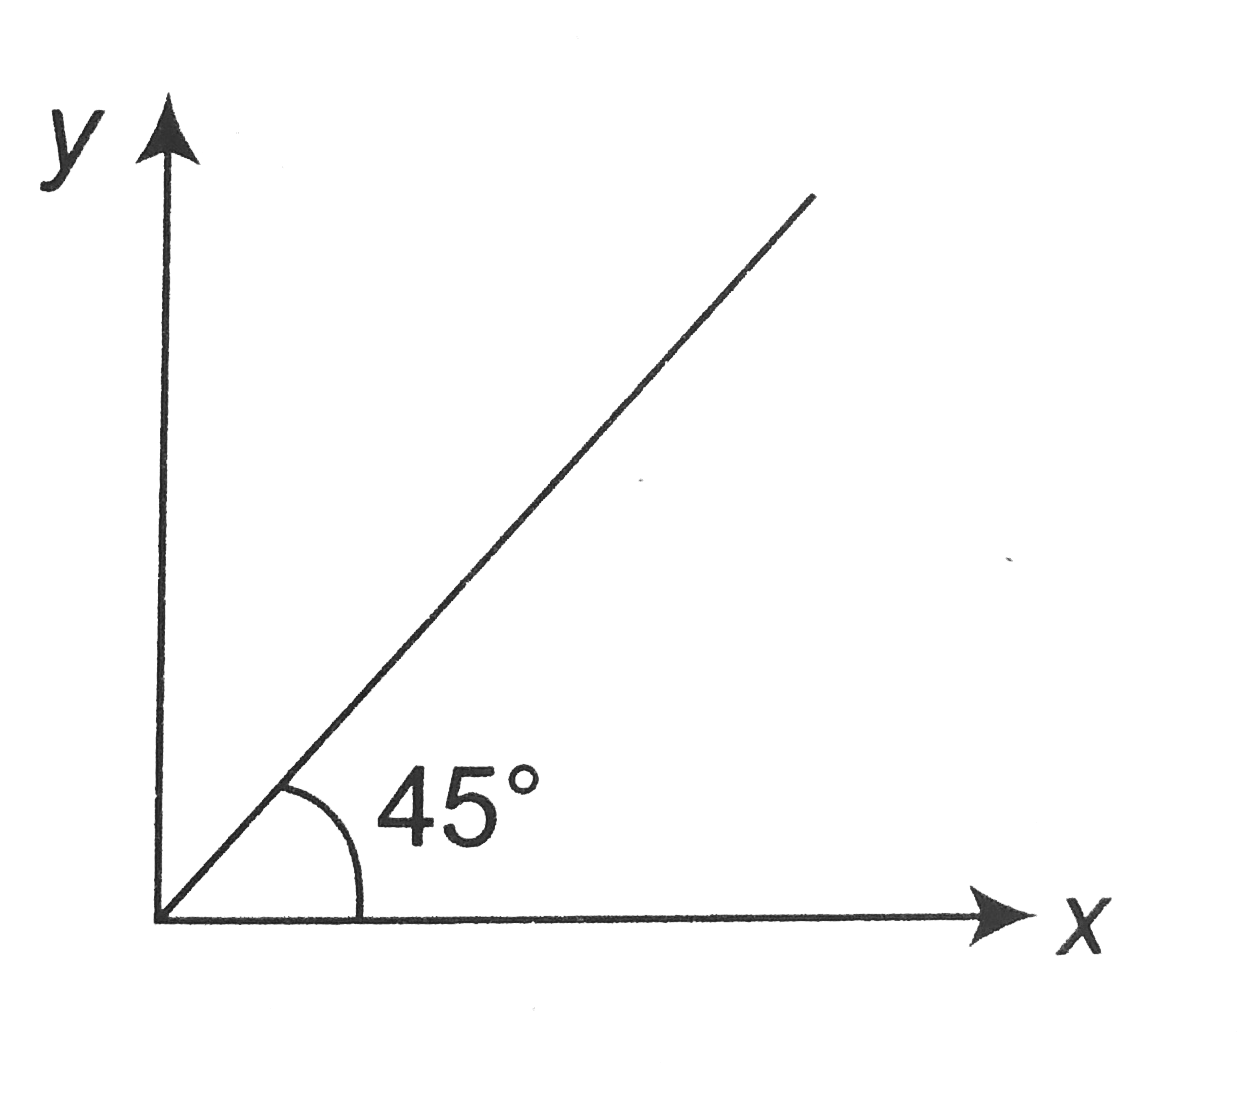 The product of Young's modulus of the material of the wire with its cross sectional area is equal to its length. Find the parameters representing x and y axes of the curve as shown: